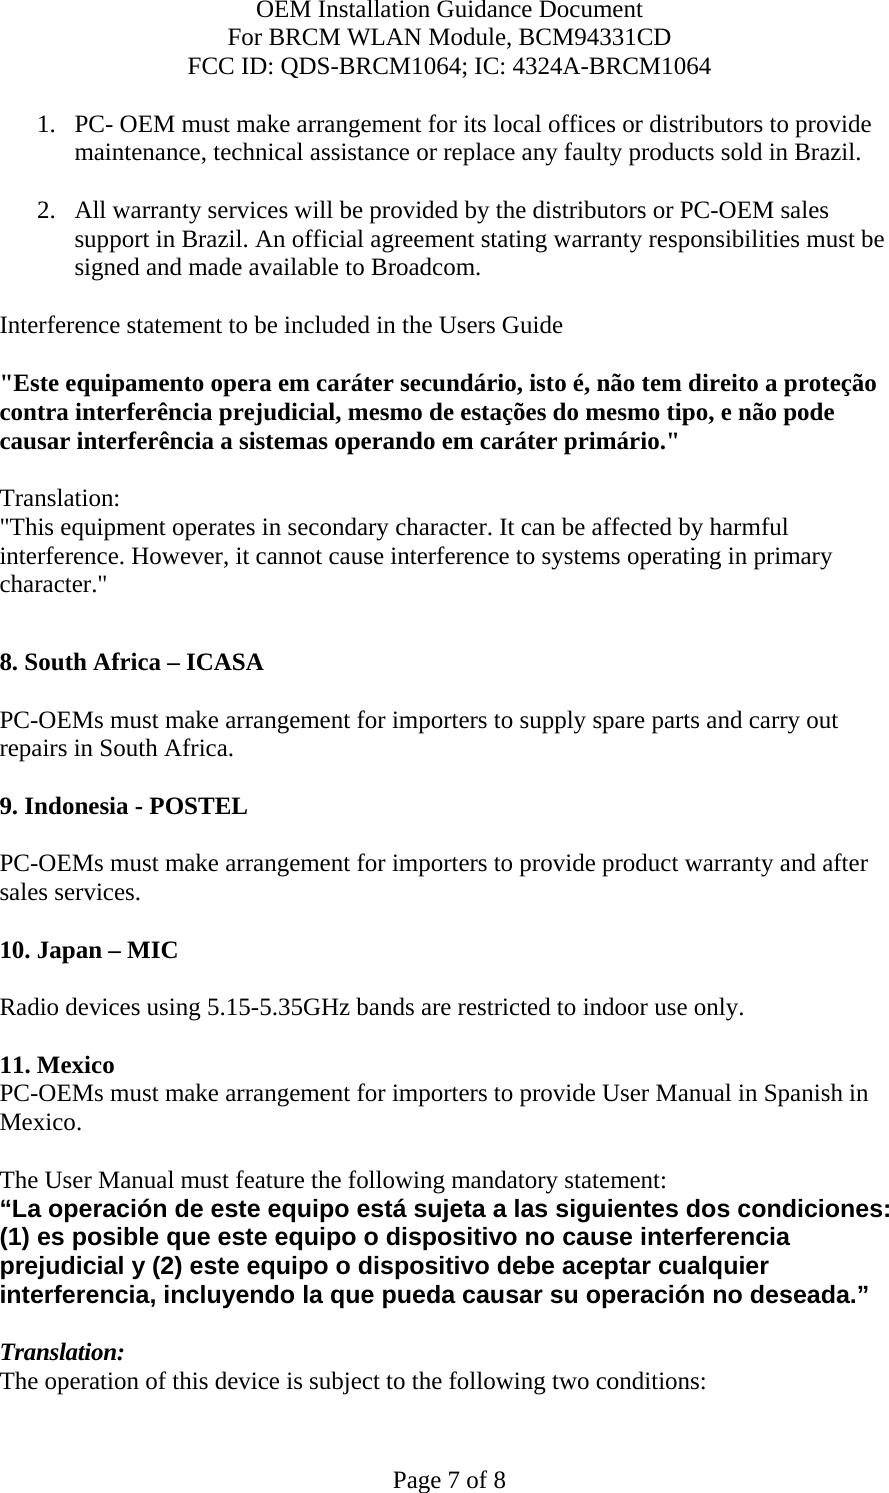 OEM Installation Guidance Document For BRCM WLAN Module, BCM94331CD FCC ID: QDS-BRCM1064; IC: 4324A-BRCM1064  Page 7 of 8 1. PC- OEM must make arrangement for its local offices or distributors to provide maintenance, technical assistance or replace any faulty products sold in Brazil.   2. All warranty services will be provided by the distributors or PC-OEM sales support in Brazil. An official agreement stating warranty responsibilities must be signed and made available to Broadcom.   Interference statement to be included in the Users Guide &quot;Este equipamento opera em caráter secundário, isto é, não tem direito a proteção contra interferência prejudicial, mesmo de estações do mesmo tipo, e não pode causar interferência a sistemas operando em caráter primário.&quot; Translation:  &quot;This equipment operates in secondary character. It can be affected by harmful interference. However, it cannot cause interference to systems operating in primary character.&quot;    8. South Africa – ICASA  PC-OEMs must make arrangement for importers to supply spare parts and carry out repairs in South Africa.  9. Indonesia - POSTEL  PC-OEMs must make arrangement for importers to provide product warranty and after sales services.   10. Japan – MIC  Radio devices using 5.15-5.35GHz bands are restricted to indoor use only.   11. Mexico  PC-OEMs must make arrangement for importers to provide User Manual in Spanish in Mexico.  The User Manual must feature the following mandatory statement: “La operación de este equipo está sujeta a las siguientes dos condiciones: (1) es posible que este equipo o dispositivo no cause interferencia prejudicial y (2) este equipo o dispositivo debe aceptar cualquier interferencia, incluyendo la que pueda causar su operación no deseada.”  Translation: The operation of this device is subject to the following two conditions: 